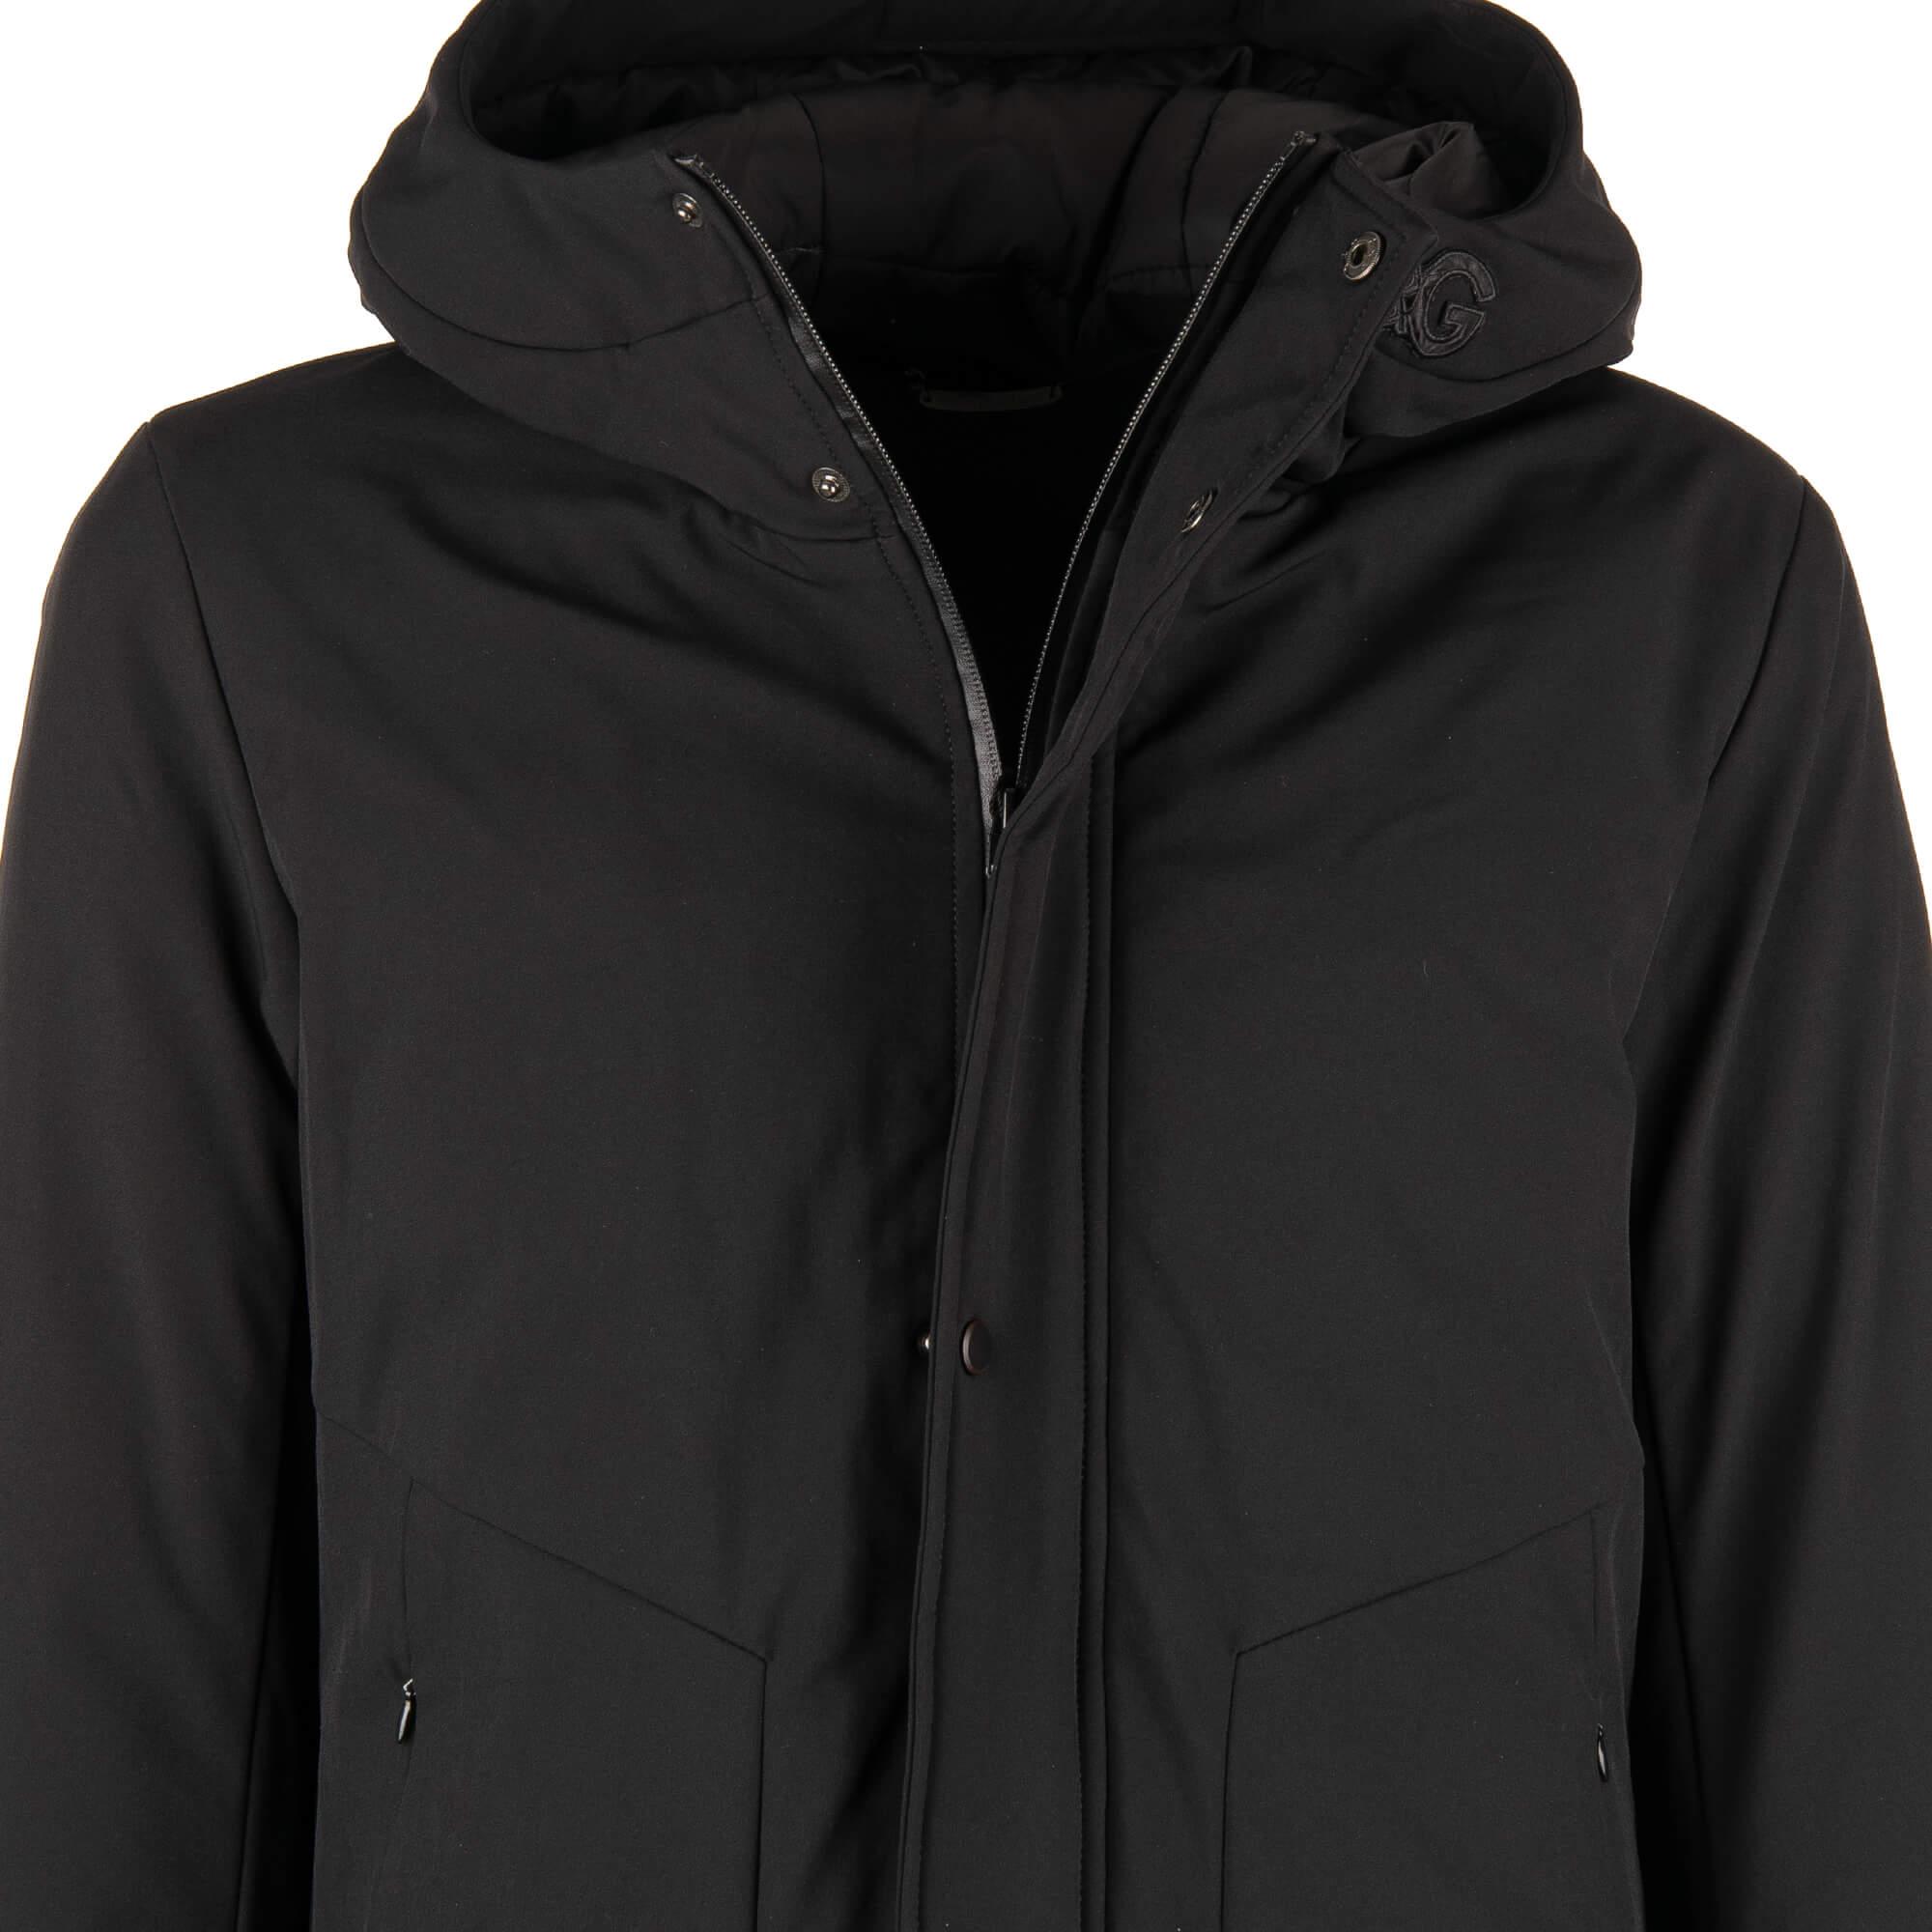 Dolce & Gabbana Classic Hooded Parka Jacket with Pockets and Logo Black ...